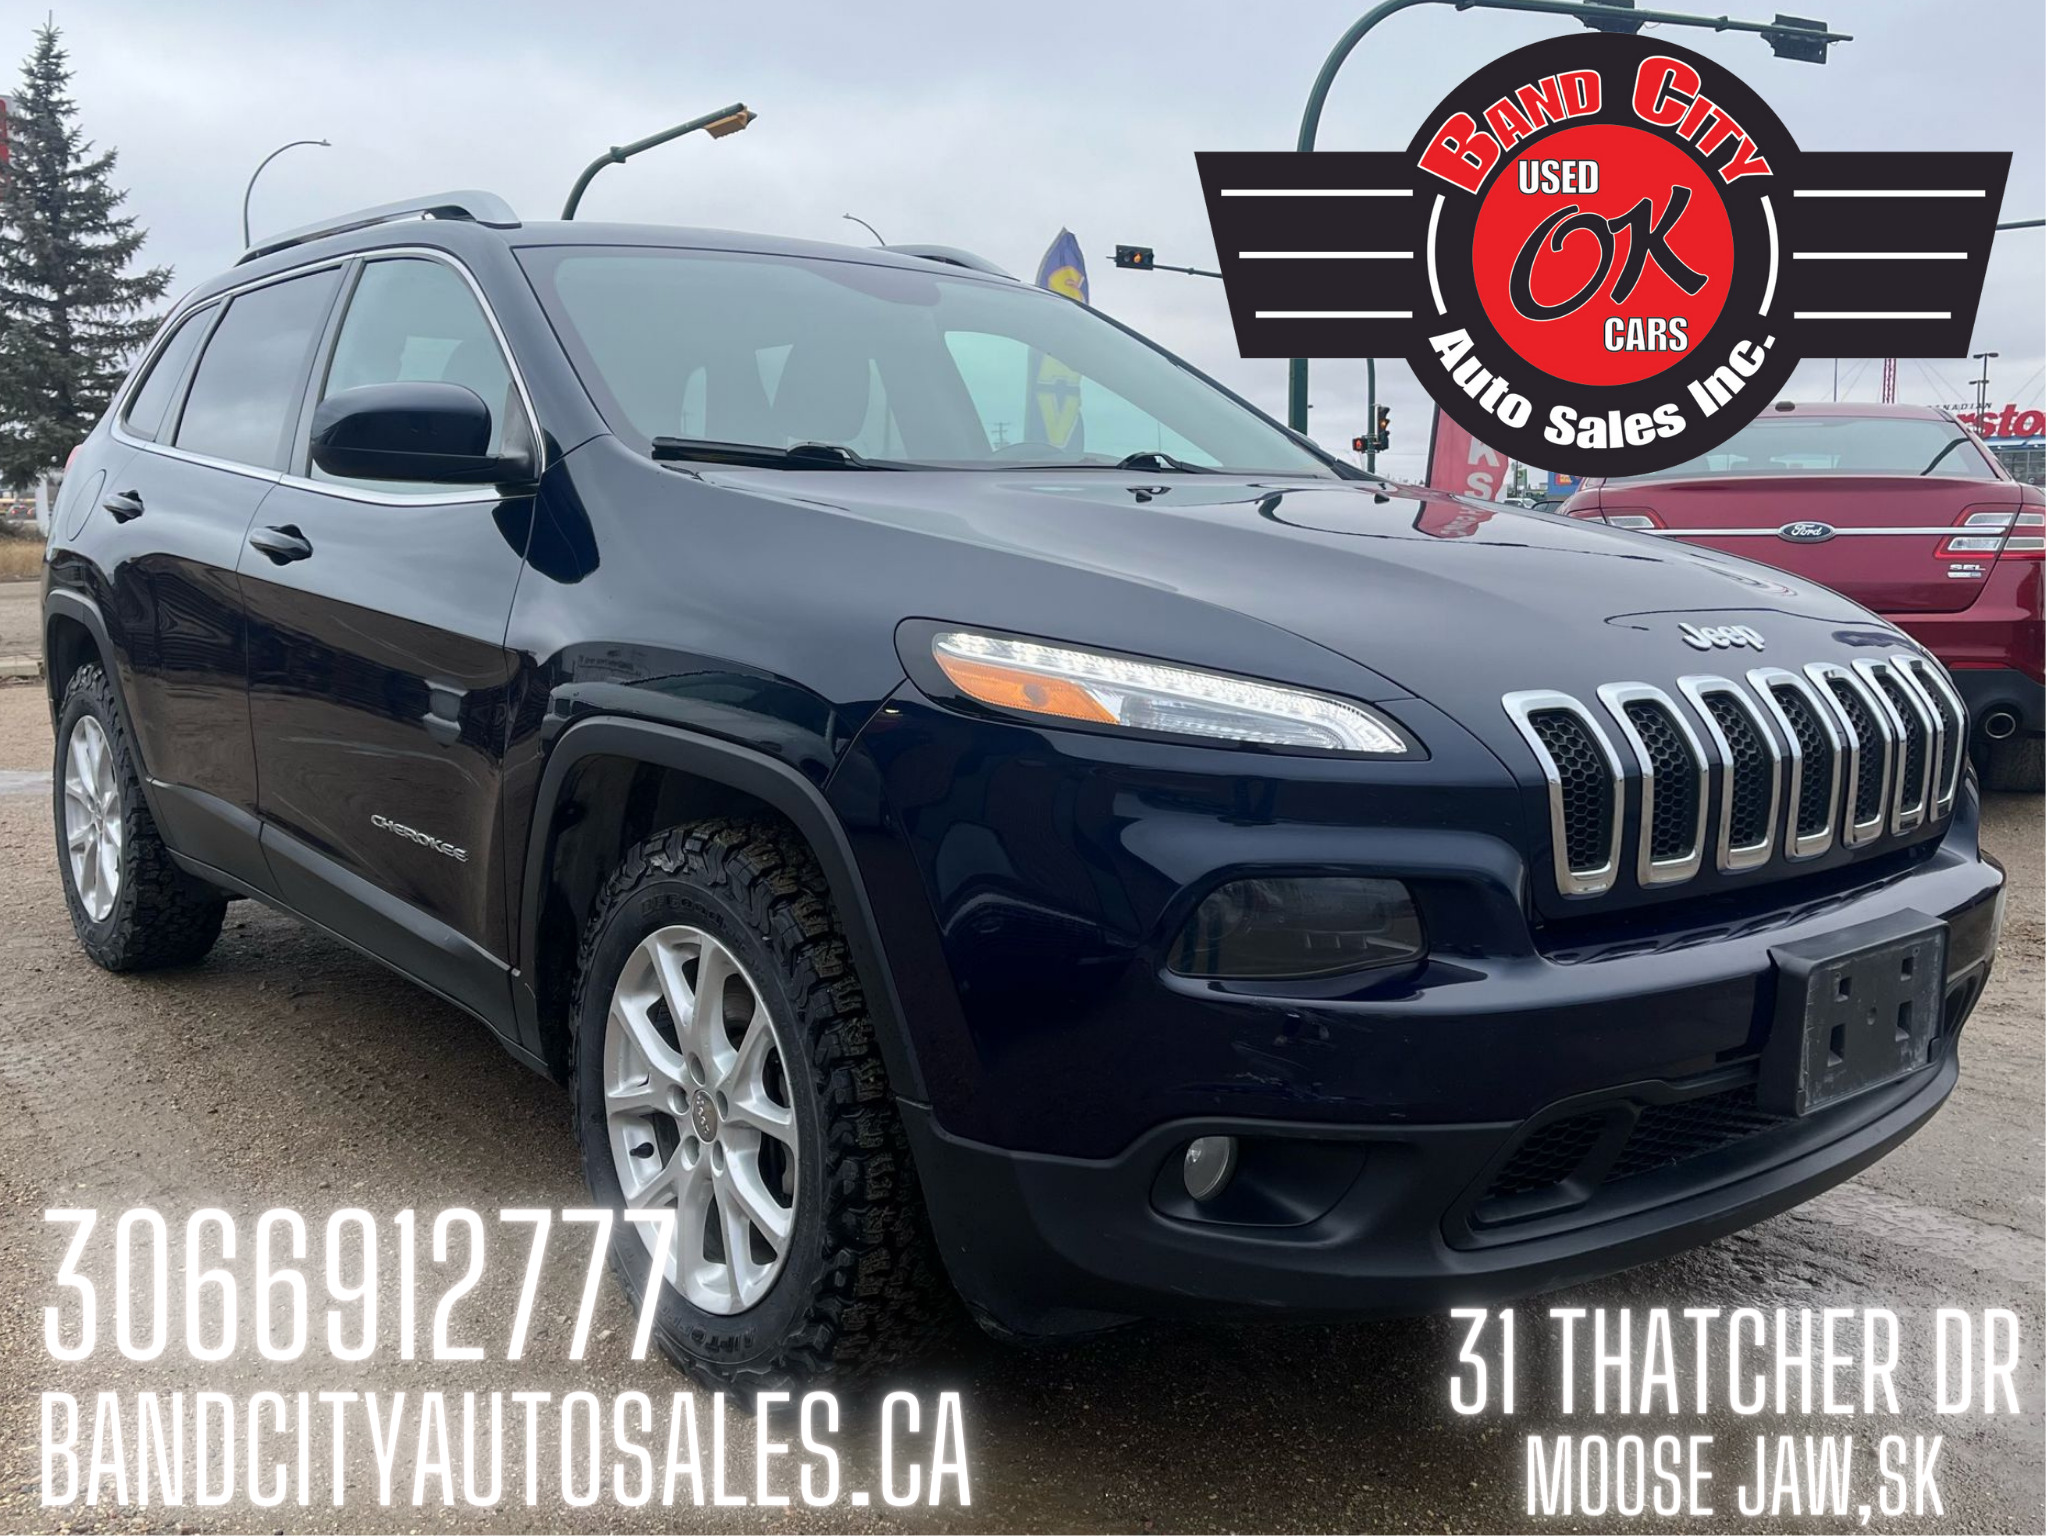 2015 Jeep Cherokee 4WD 4dr North